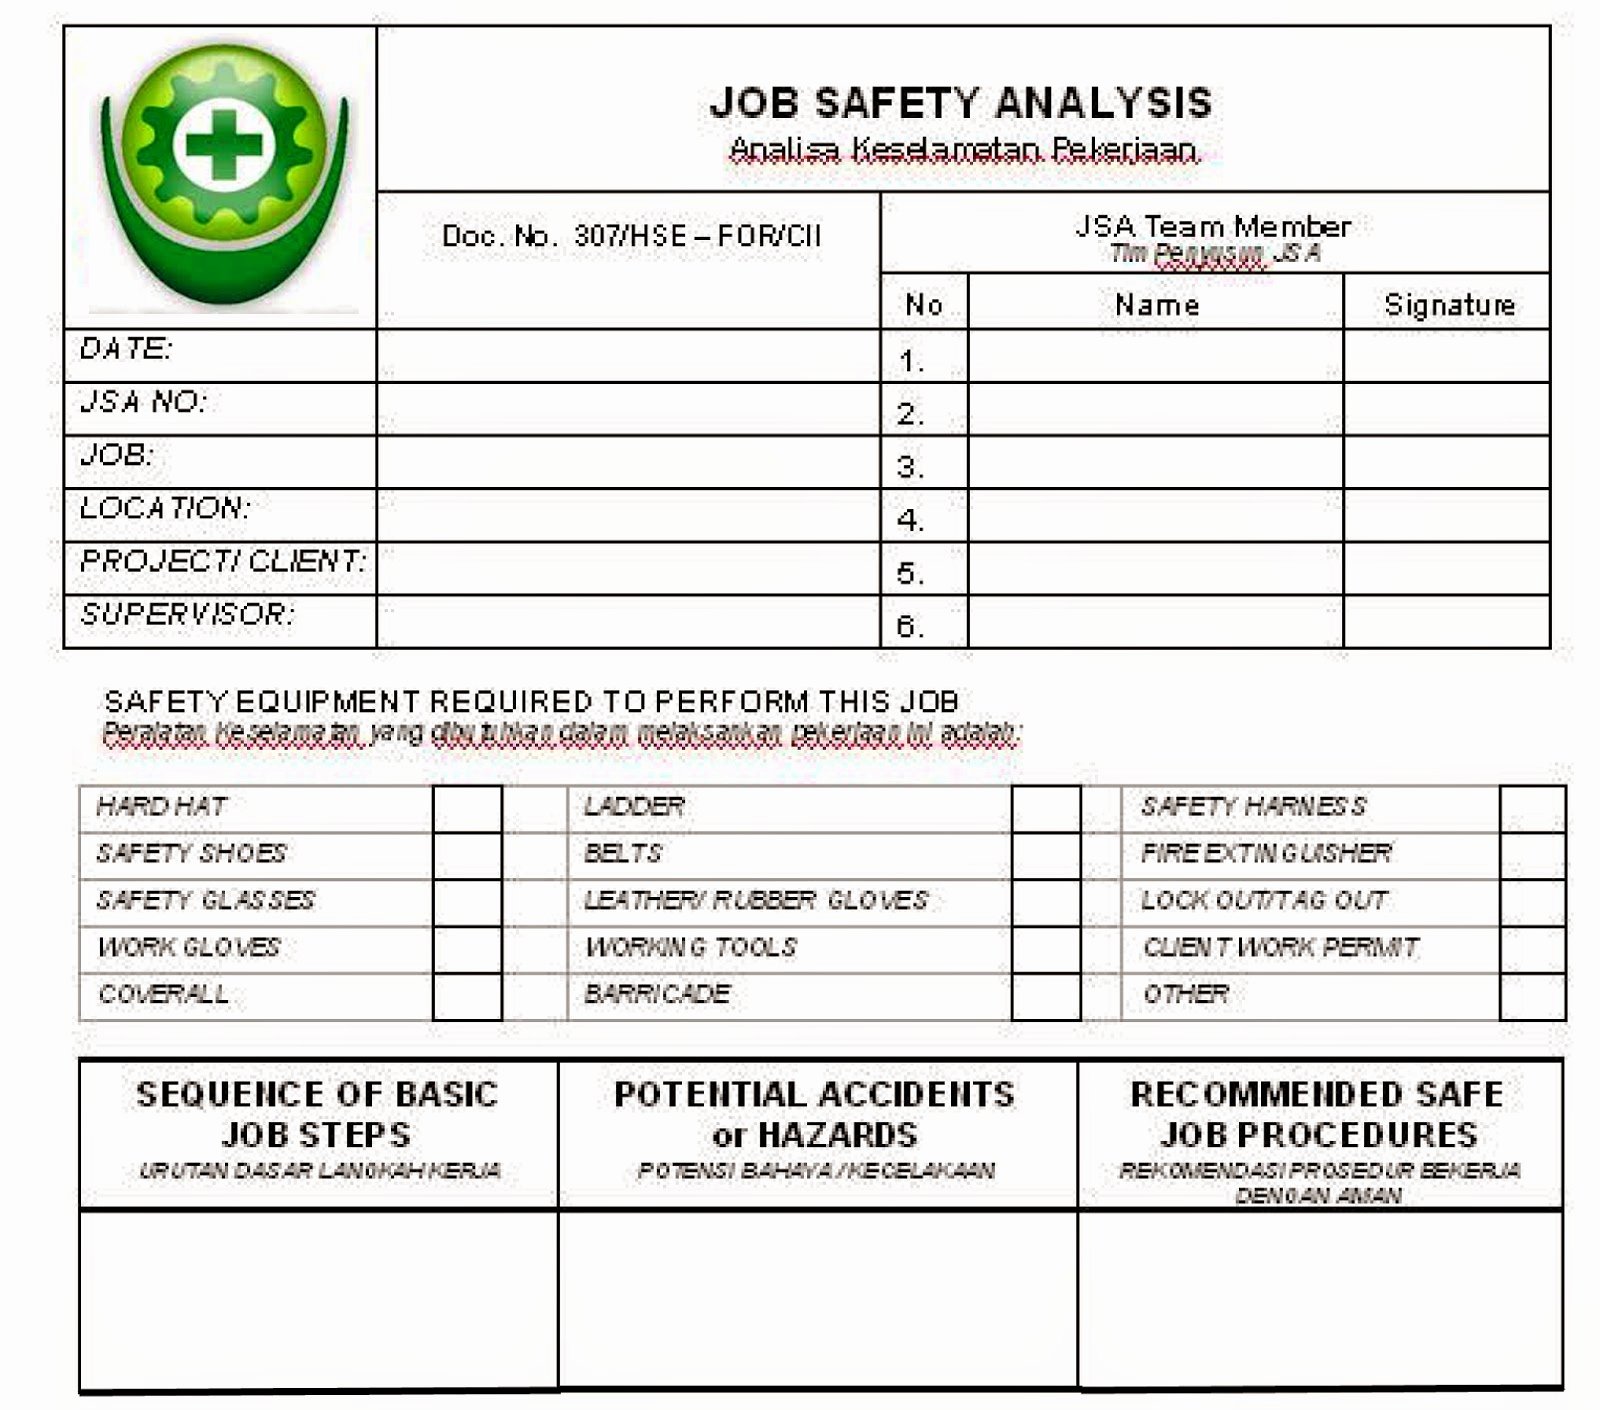 Job Safety Analysis Example Best Of Quality Control and She Engineering June 2014